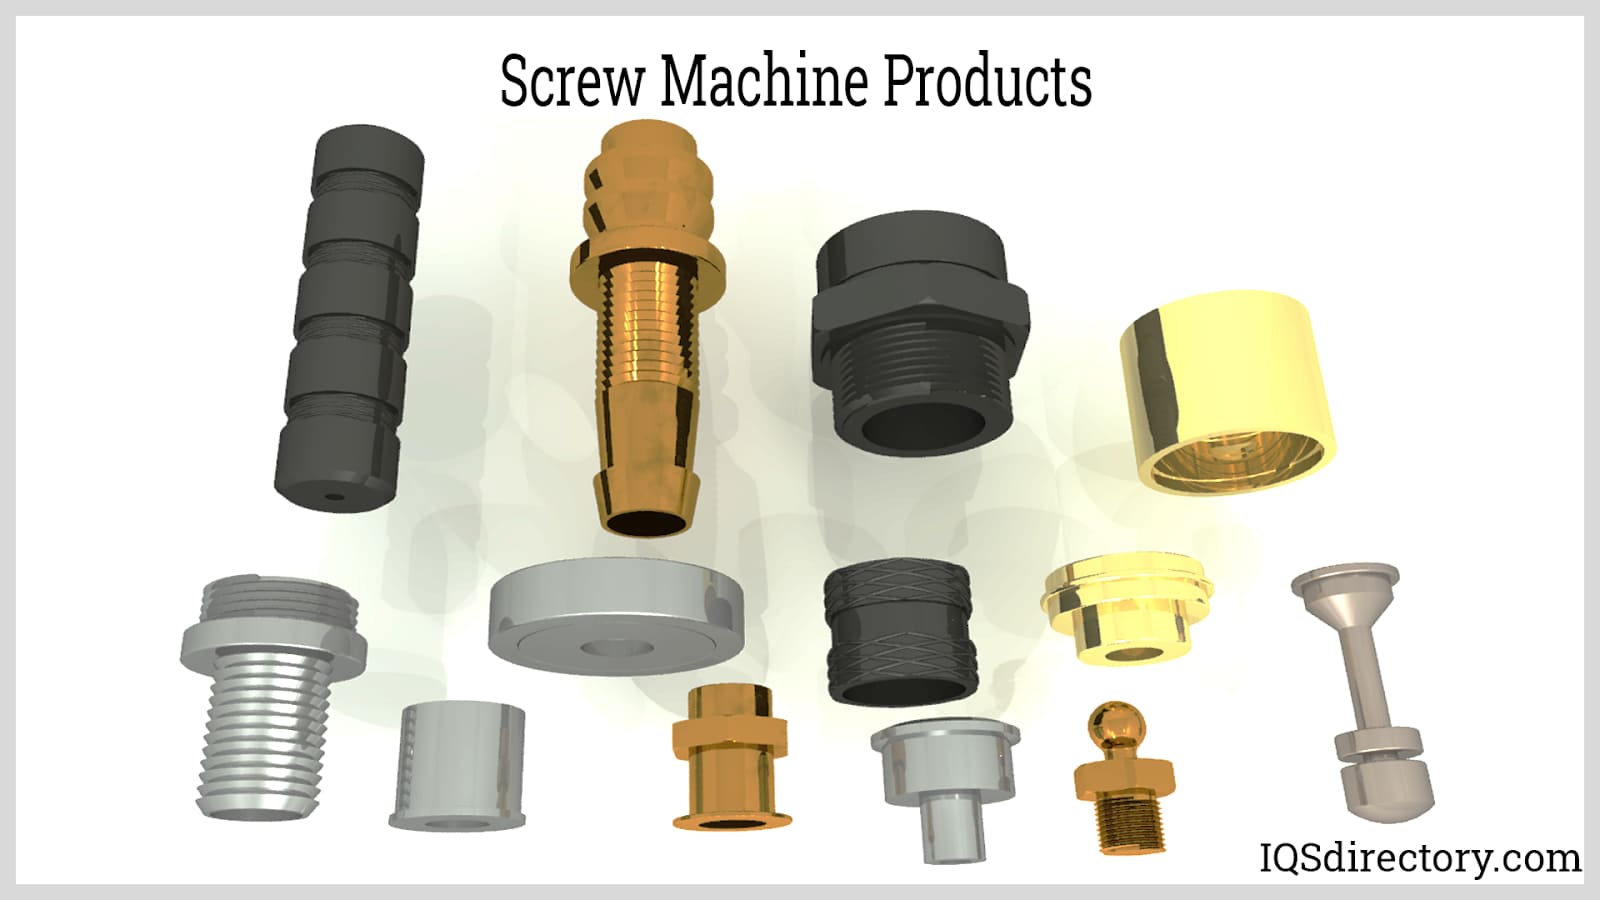 Screw, Machine Components & Uses in Manufacturing